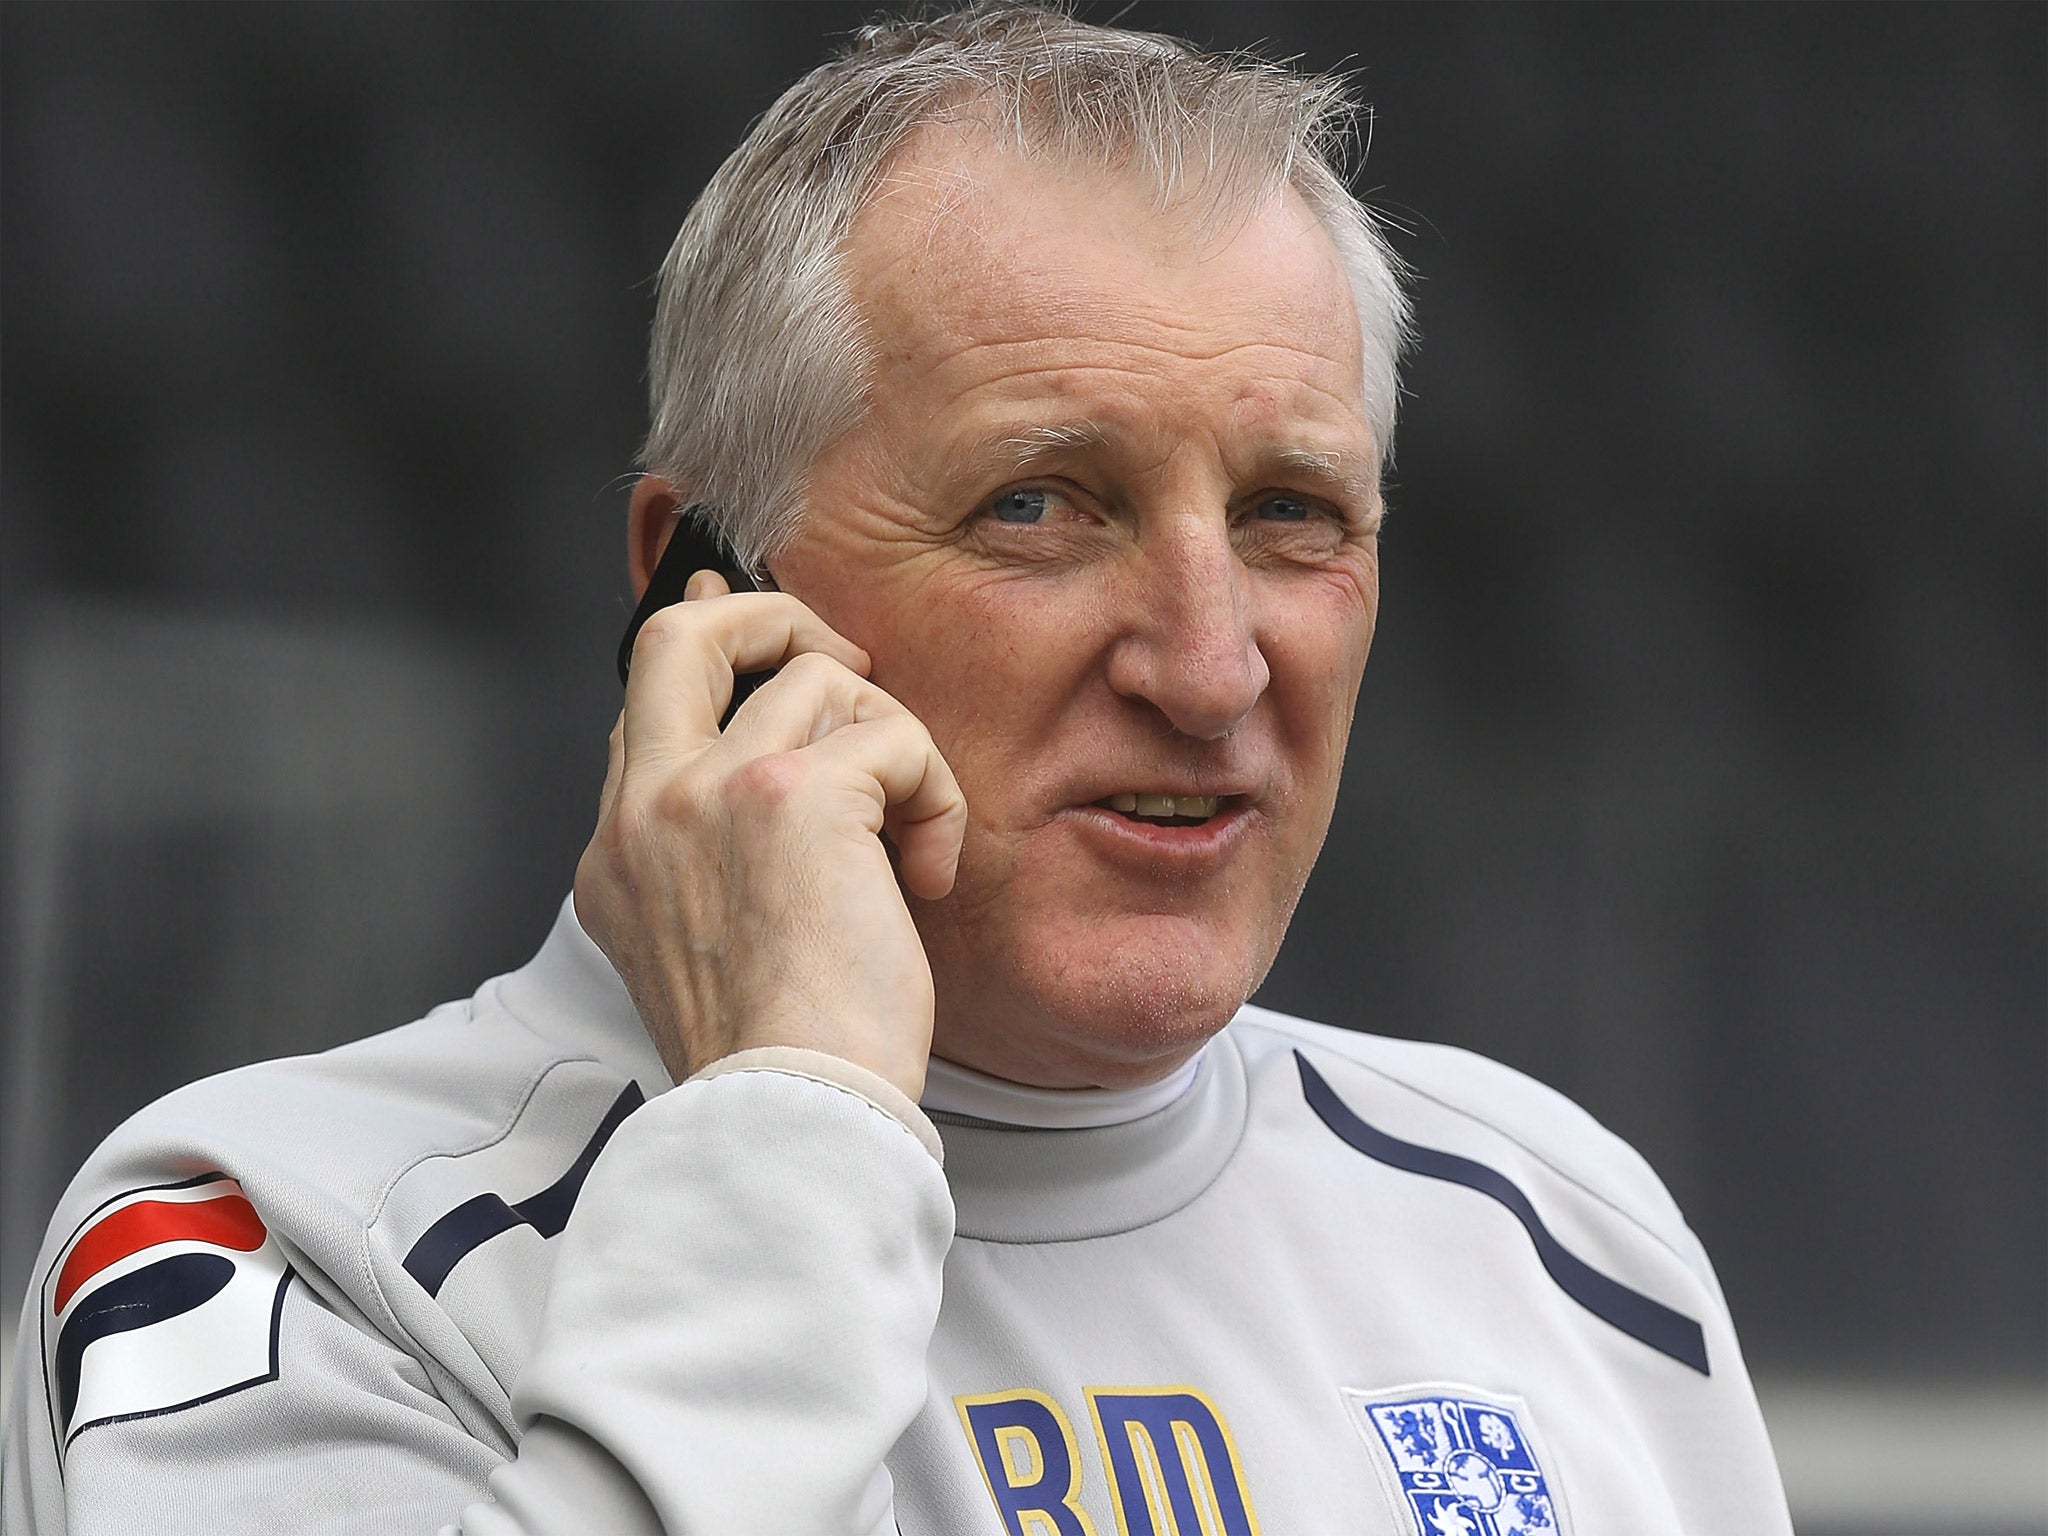 Ronnie Moore was sacked as Tranmere manager after breaking betting rules